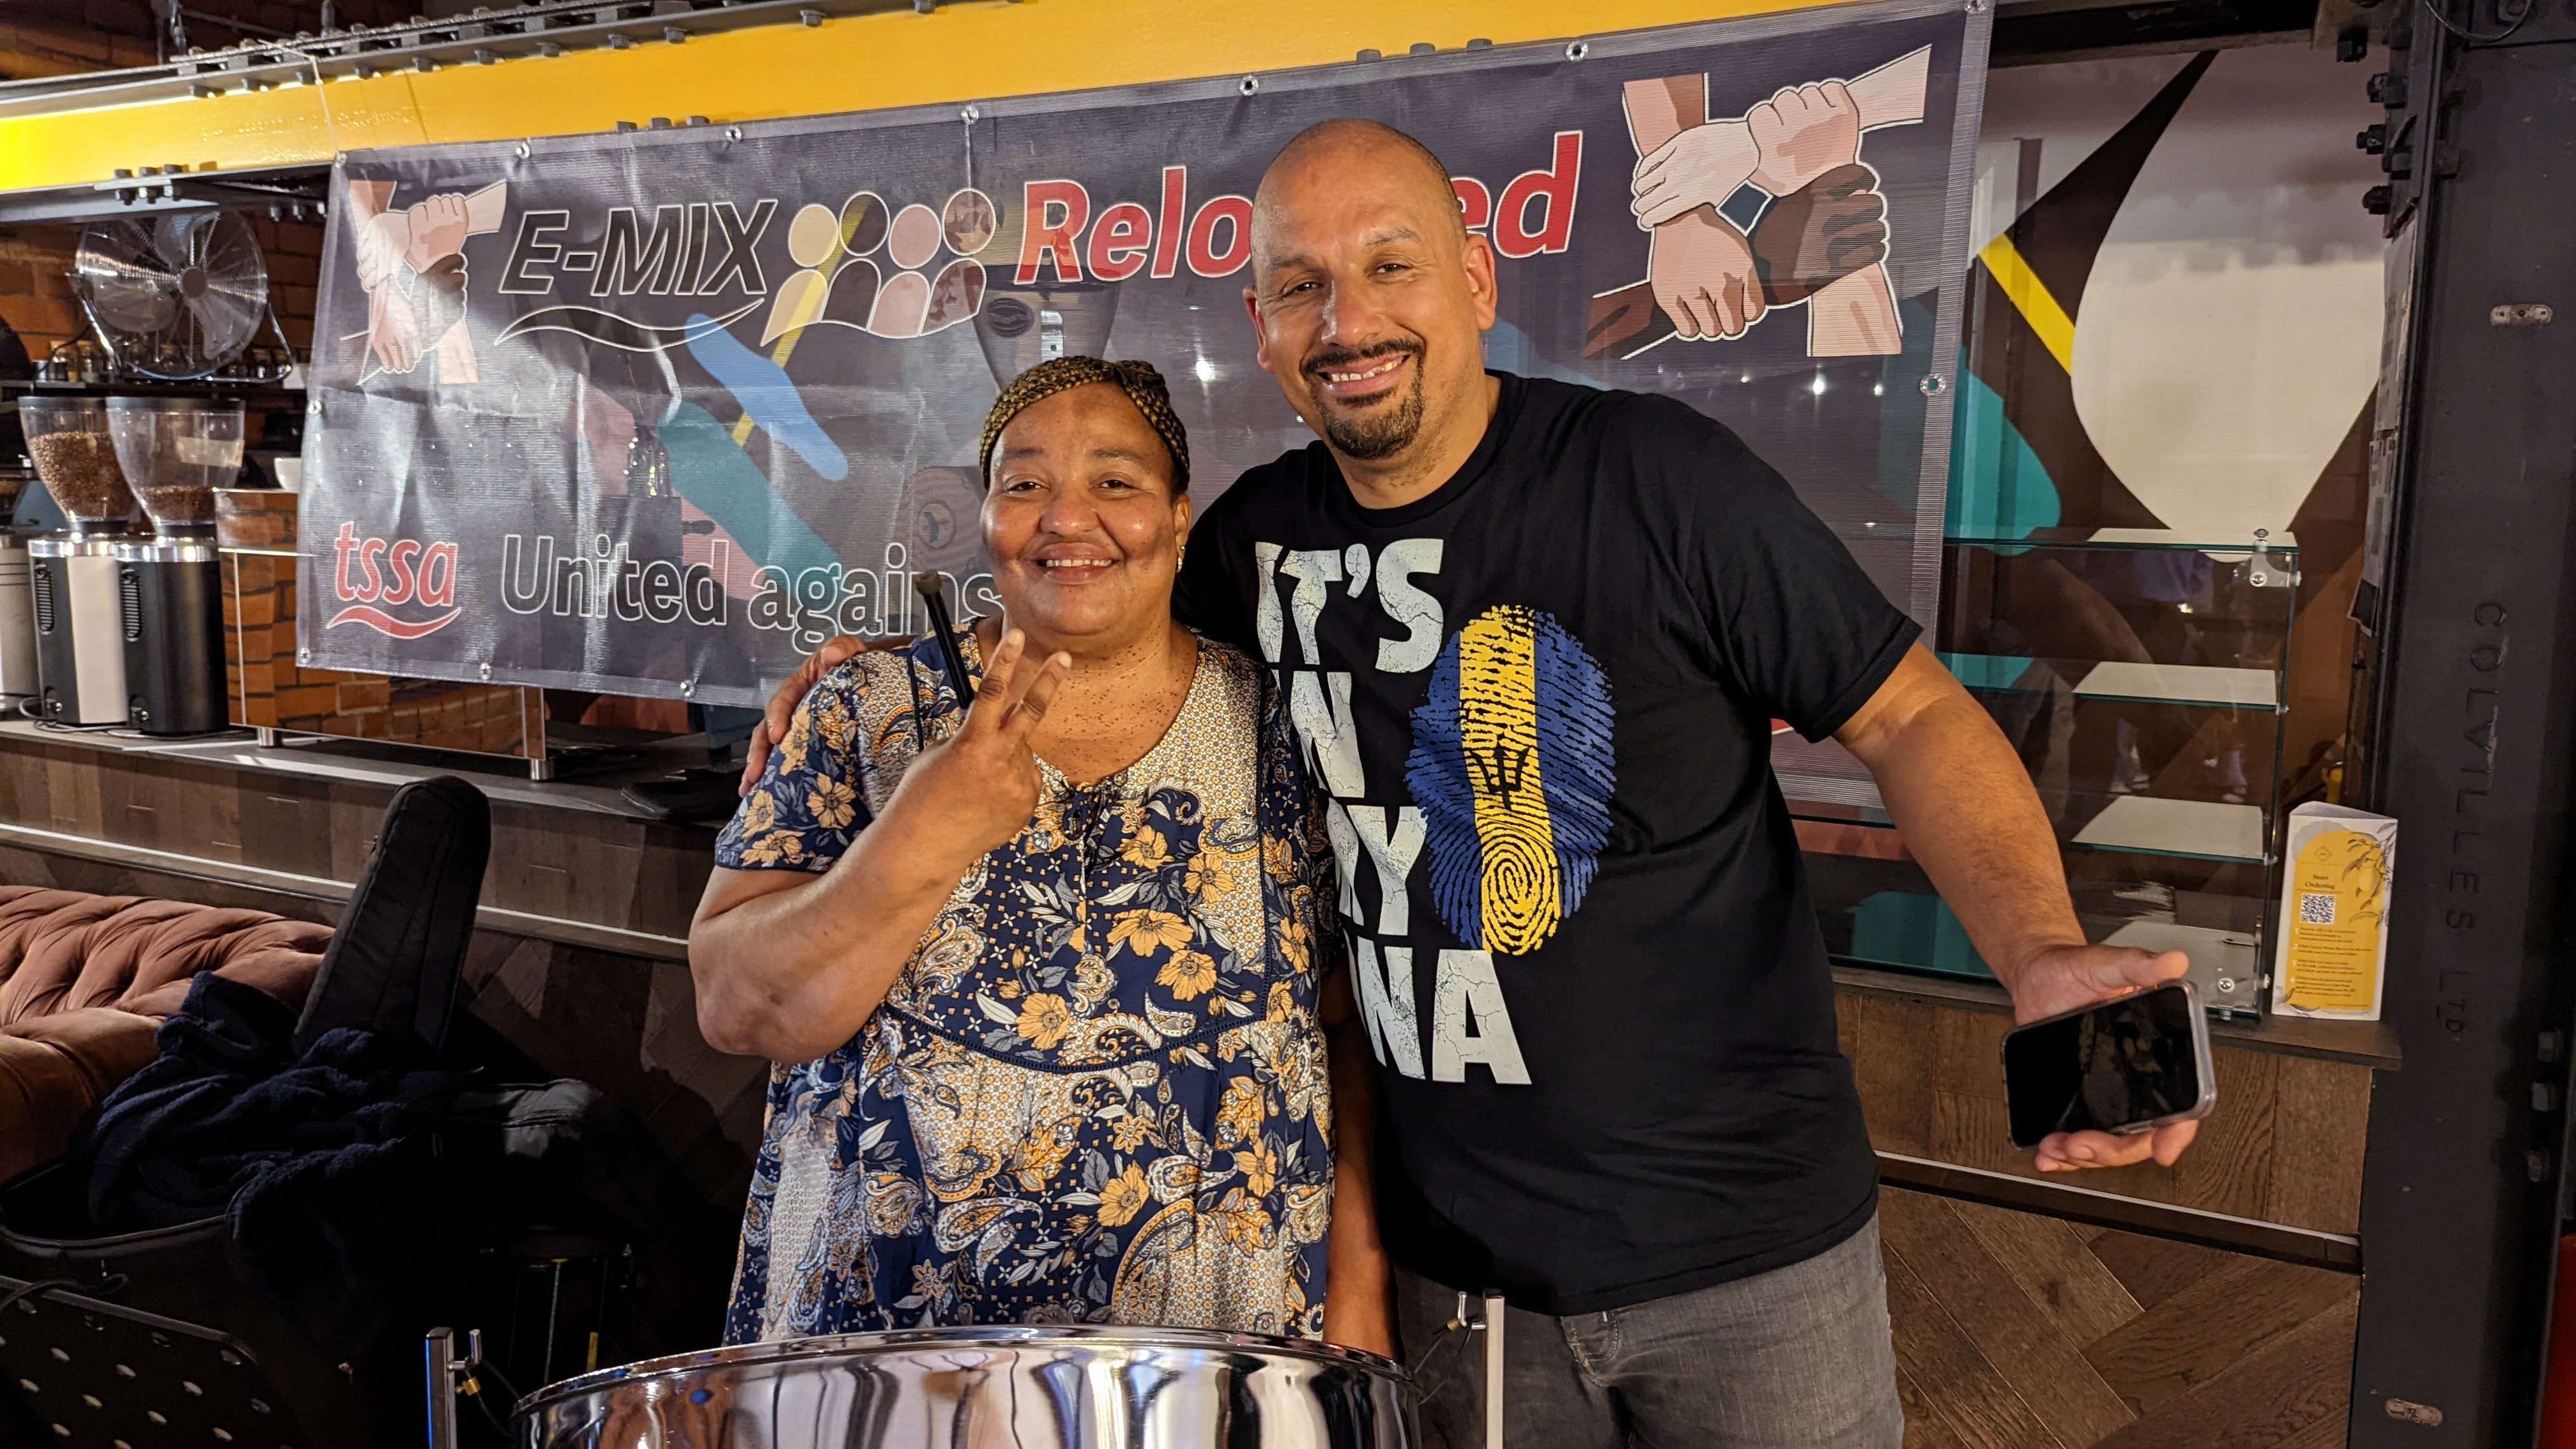 A black woman and a black man standing together. The woman is wearing a brightly covered dress and the man is wearing a black t-shirt with a blue and yellow logo. A banner behind them reads "E-mix reloaded".